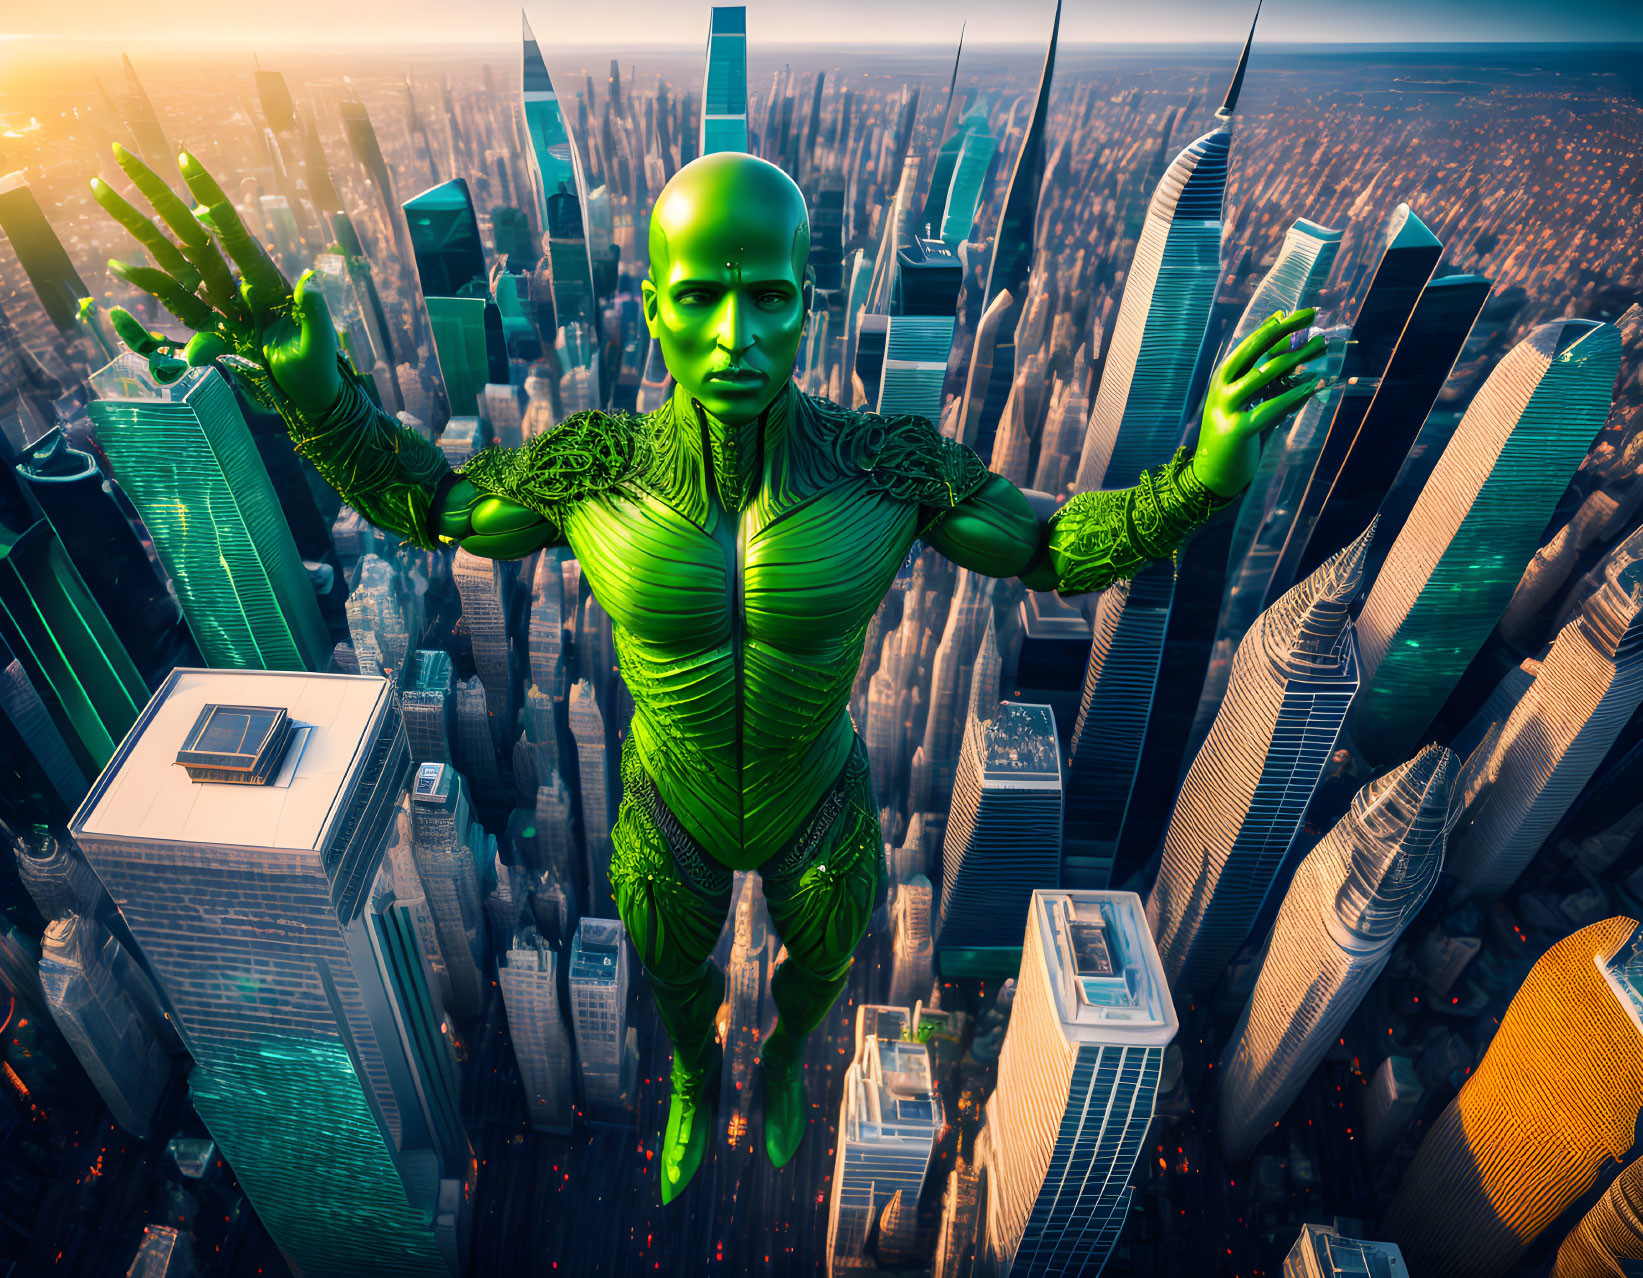 Green-skinned humanoid figure levitates over cityscape with skyscrapers.